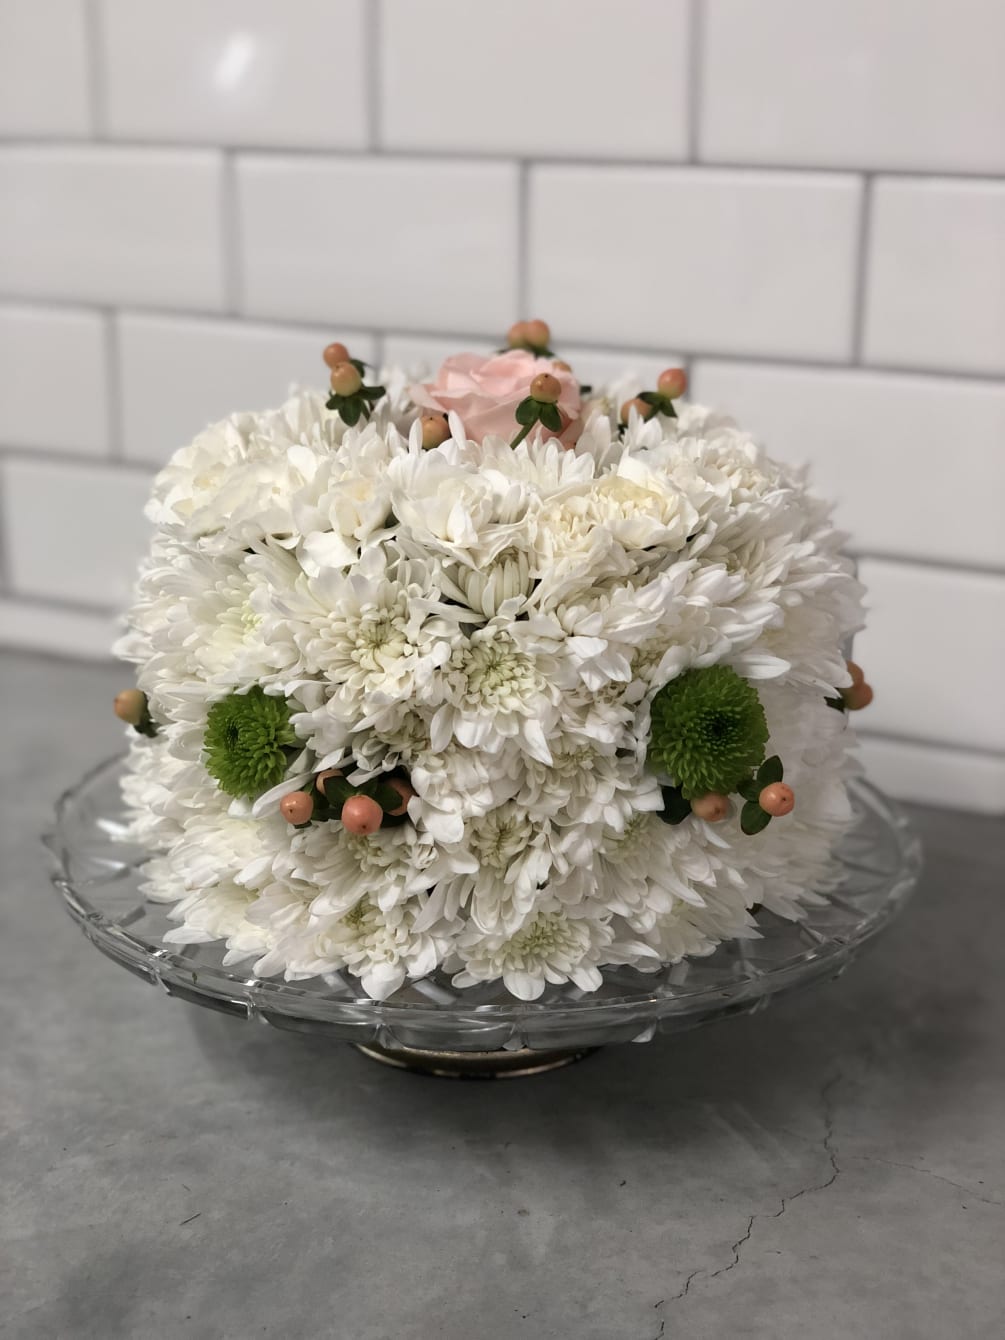 This is a Fresh Ideas Original!  Made with White flowers accented